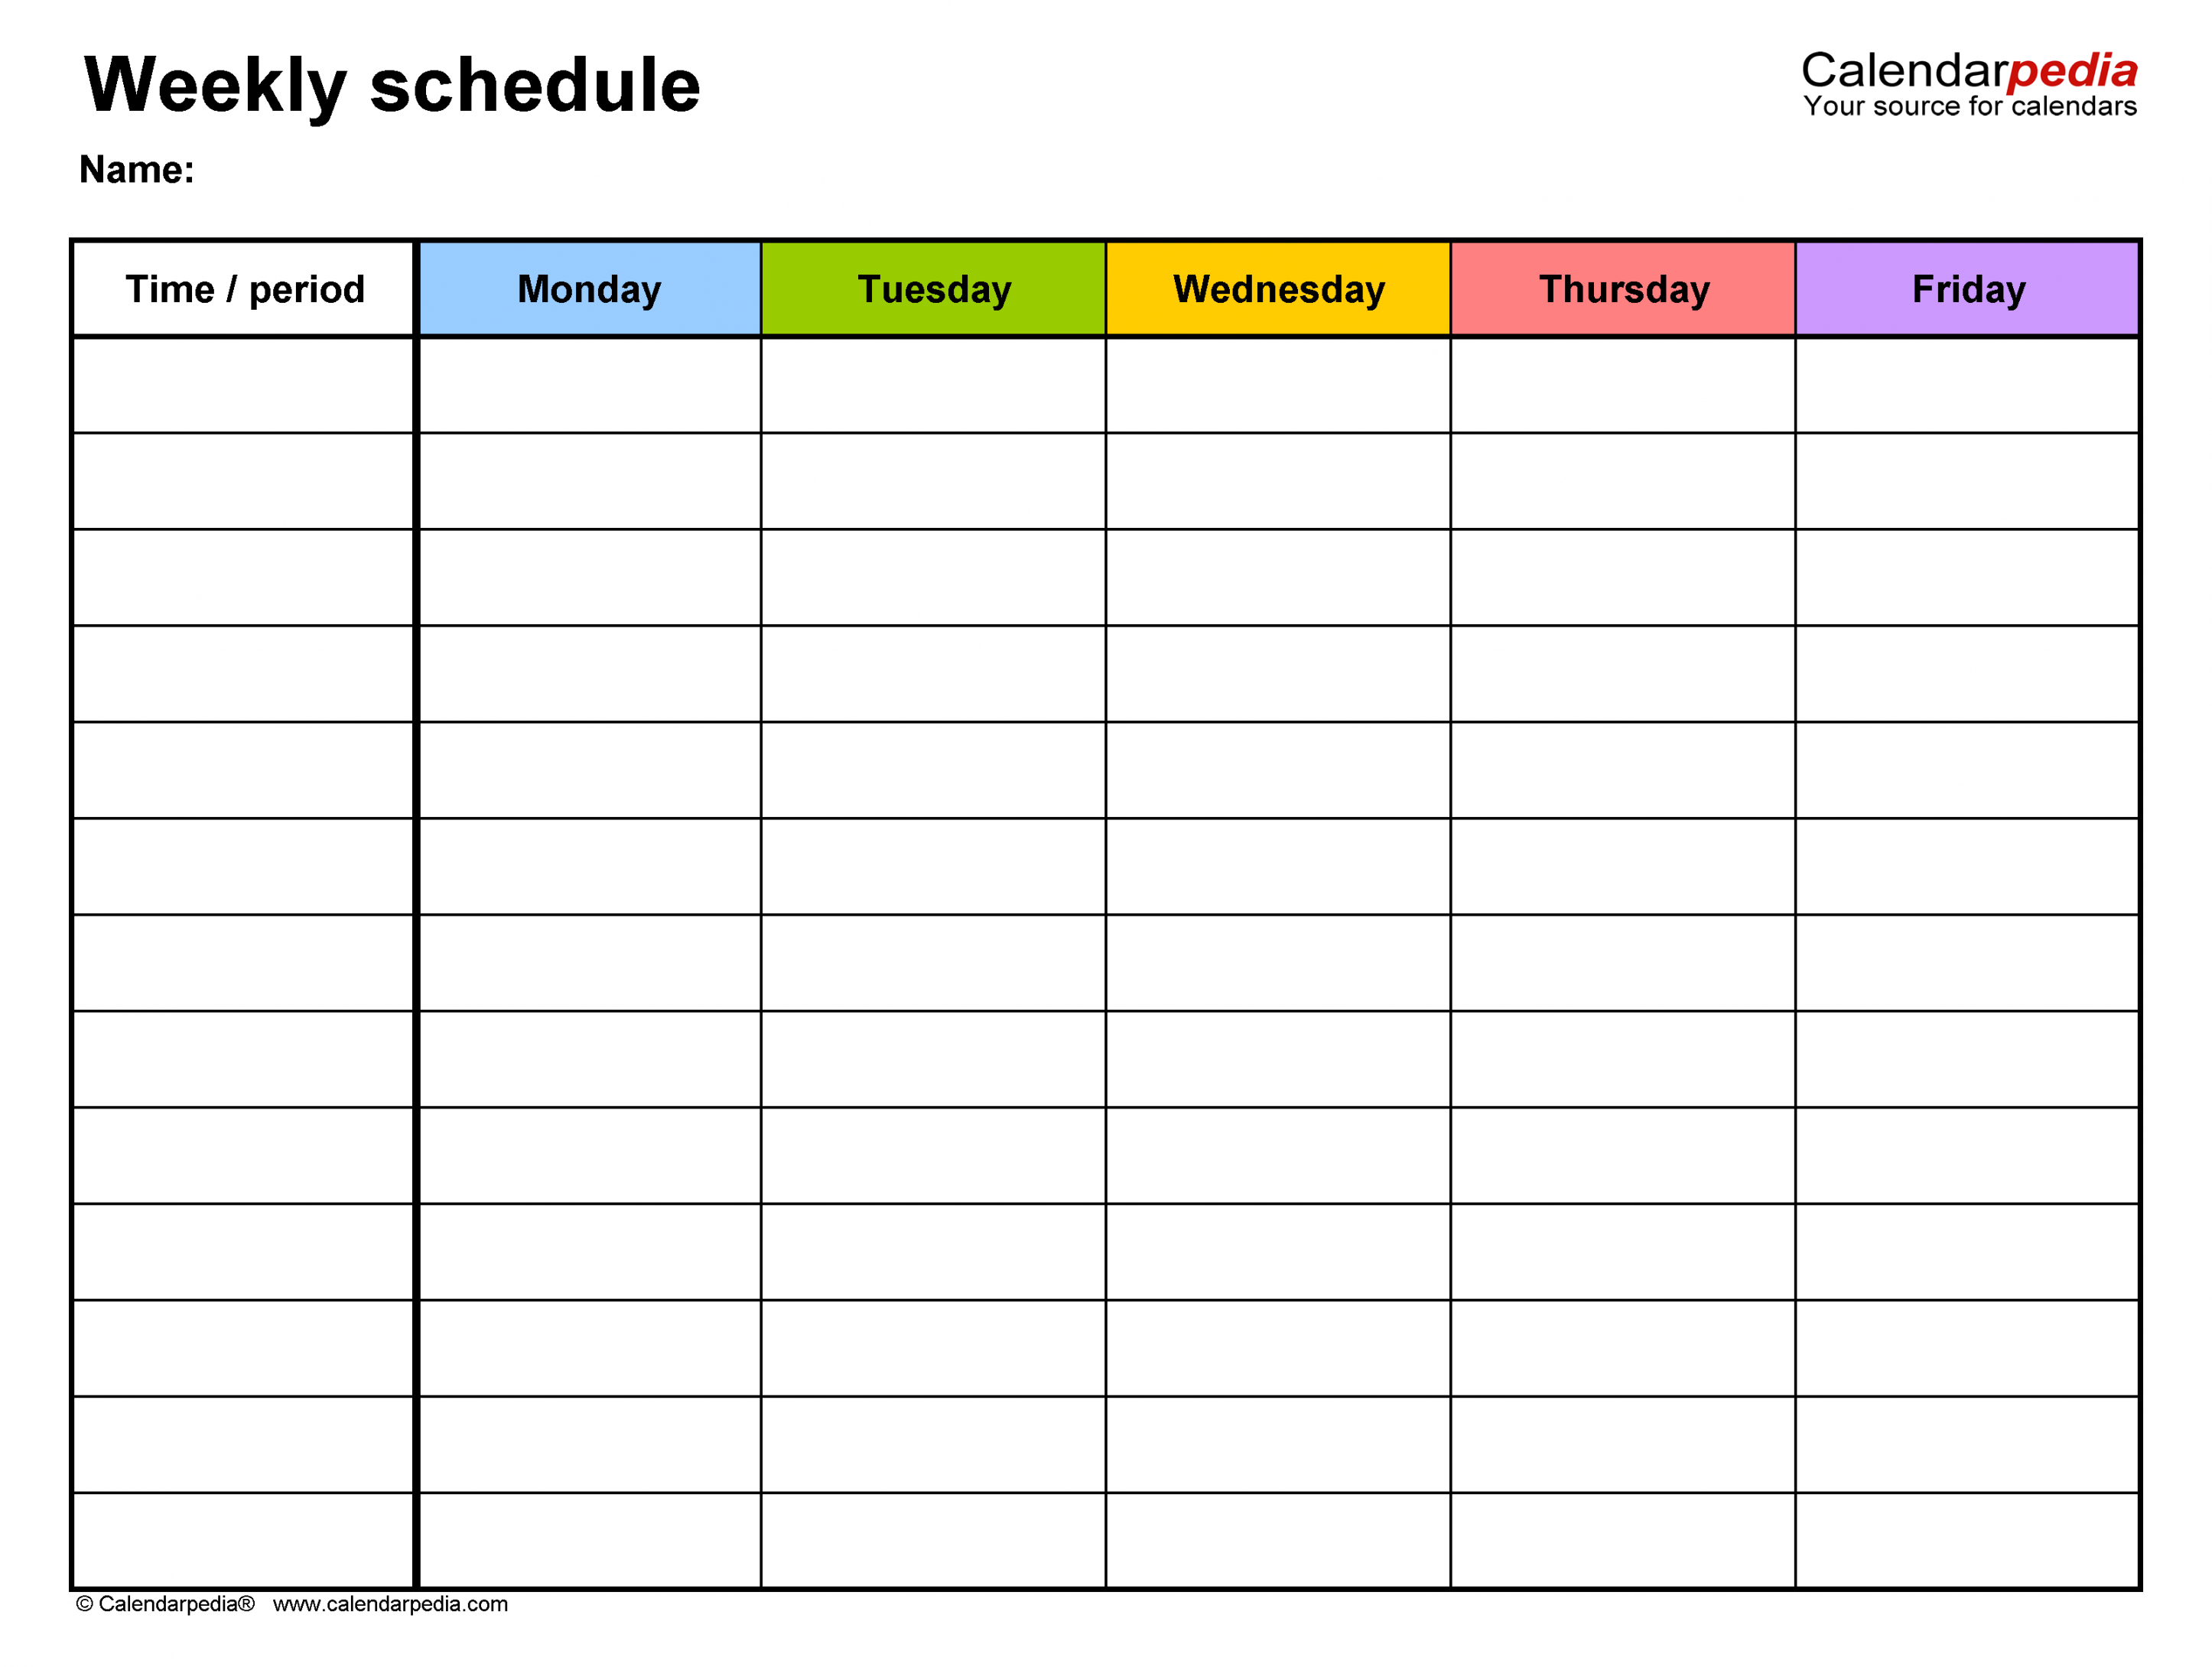 Free Printable Weekly Calendar - Printable - Free Weekly Schedules for Word -  Templates